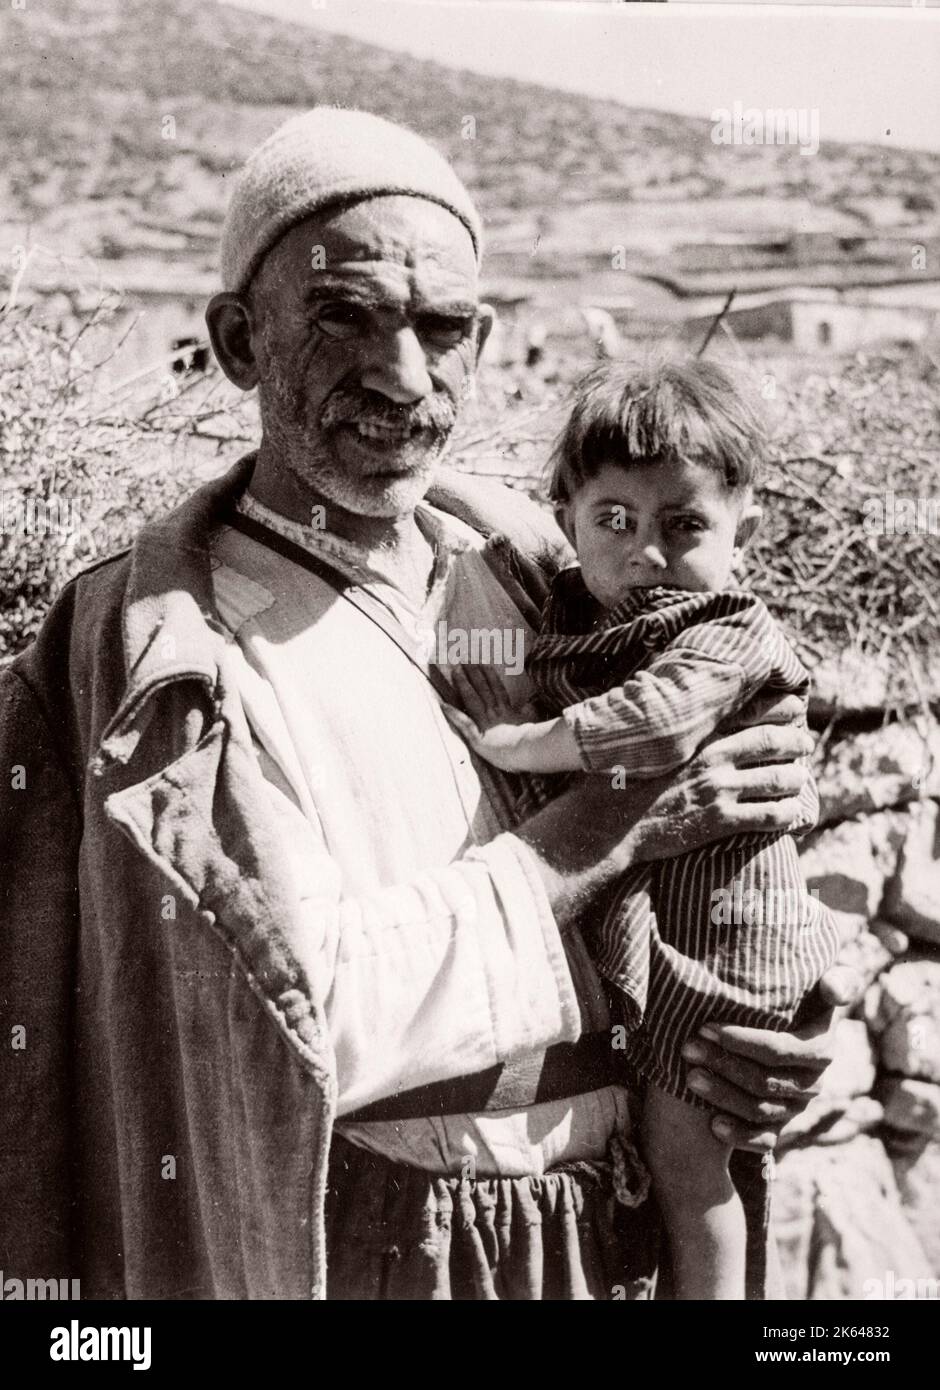 1943 Syria - British military office treats Kurdish people along the Syria Turkey border - many suffering from Trachoma Photograph by a British army recruitment officer stationed in East Africa and the Middle East during World War II Stock Photo